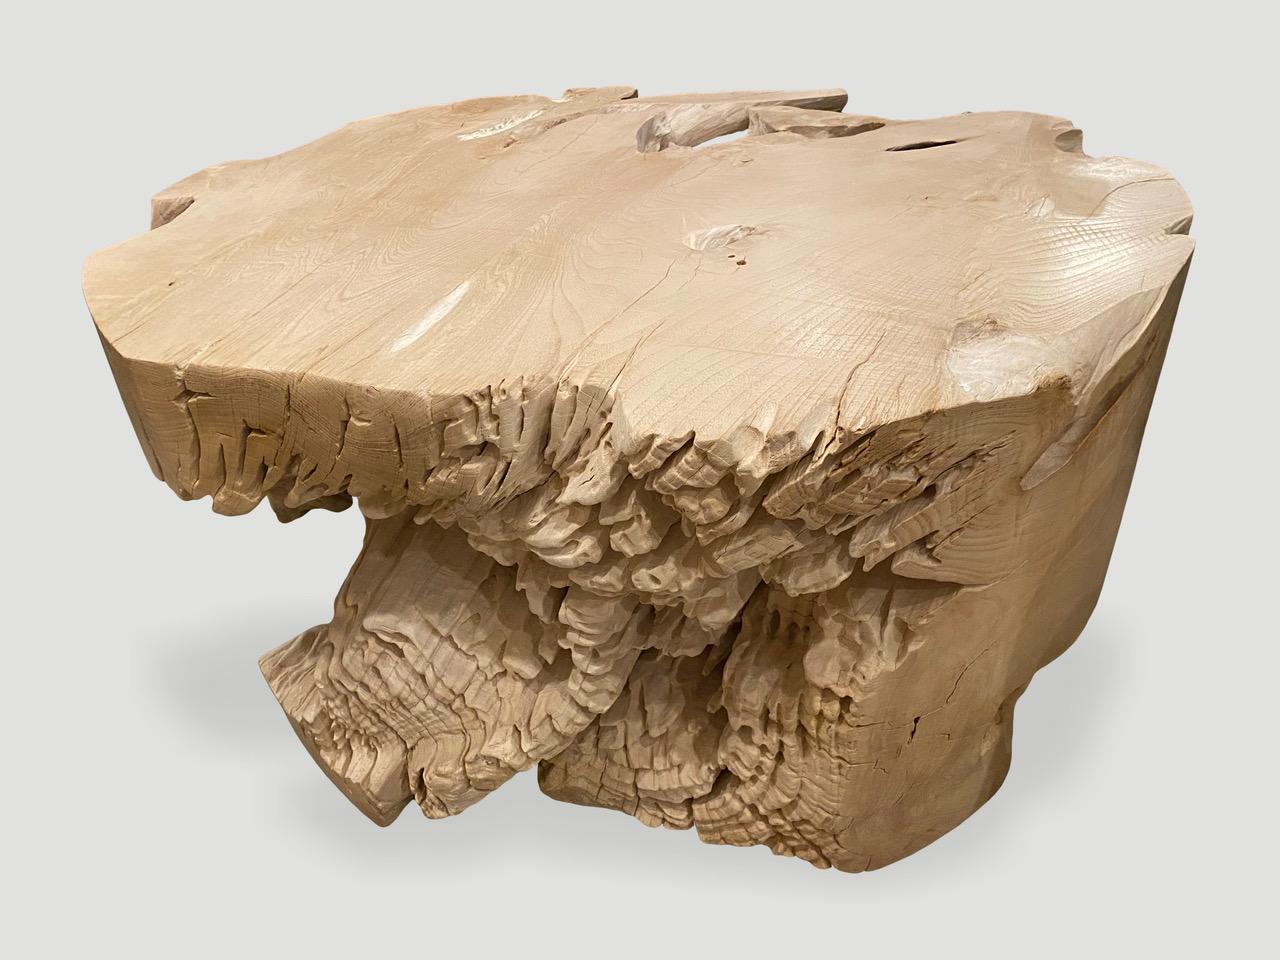 Beautiful single root organic coffee table or oversized side table with stunning erosion detail on one side. The reclaimed teak is bleached and left to bake in the sun and sea salt air for over a year to achieve this unique finish. We have added a